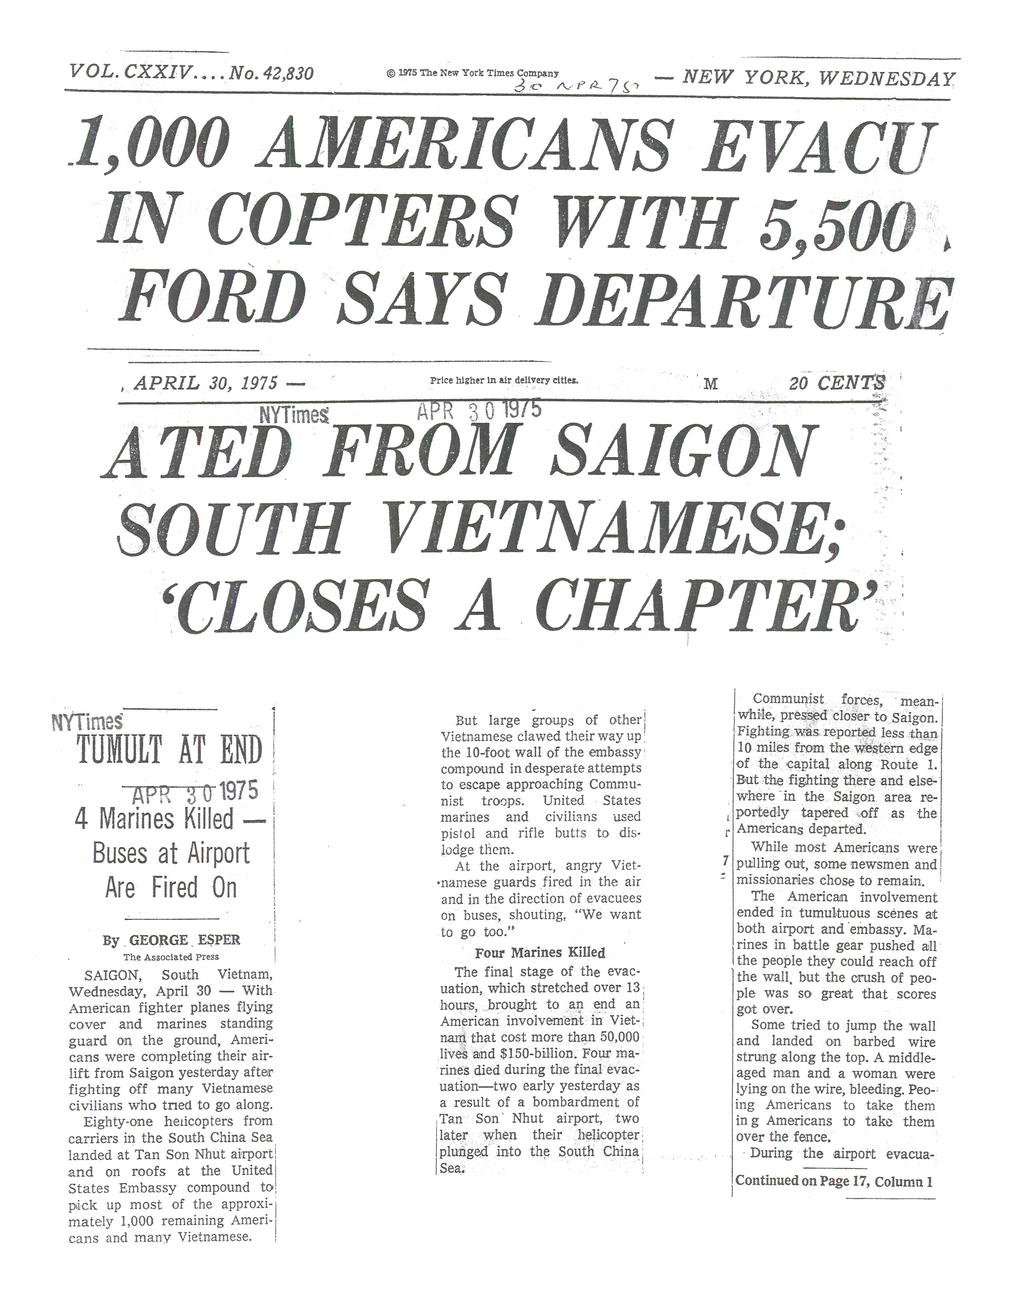 VOL. CXXIV... No. 42,830 1975 The New York Times Company NEW YORK, WEDNESDAY 1,000 AMERICANS EVACU IN COPTERS WITH 5,500 FORD SAYS DEPARTURE, APRIL 30, 1975 Price higher in air delivery titles.